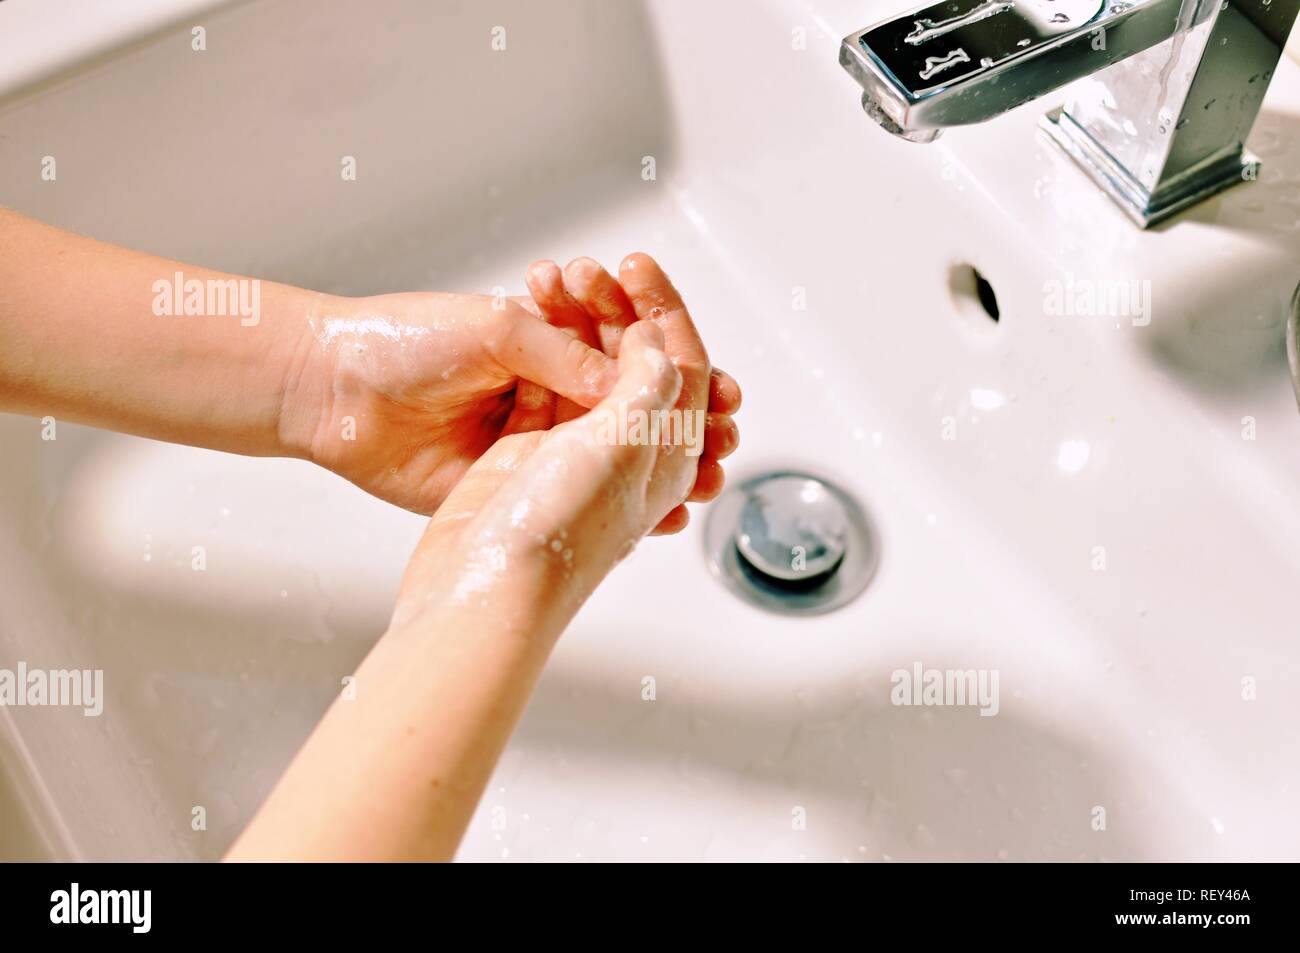 Concept of Caucasian white child hands washing with soap above the washbasin. Stock Photo